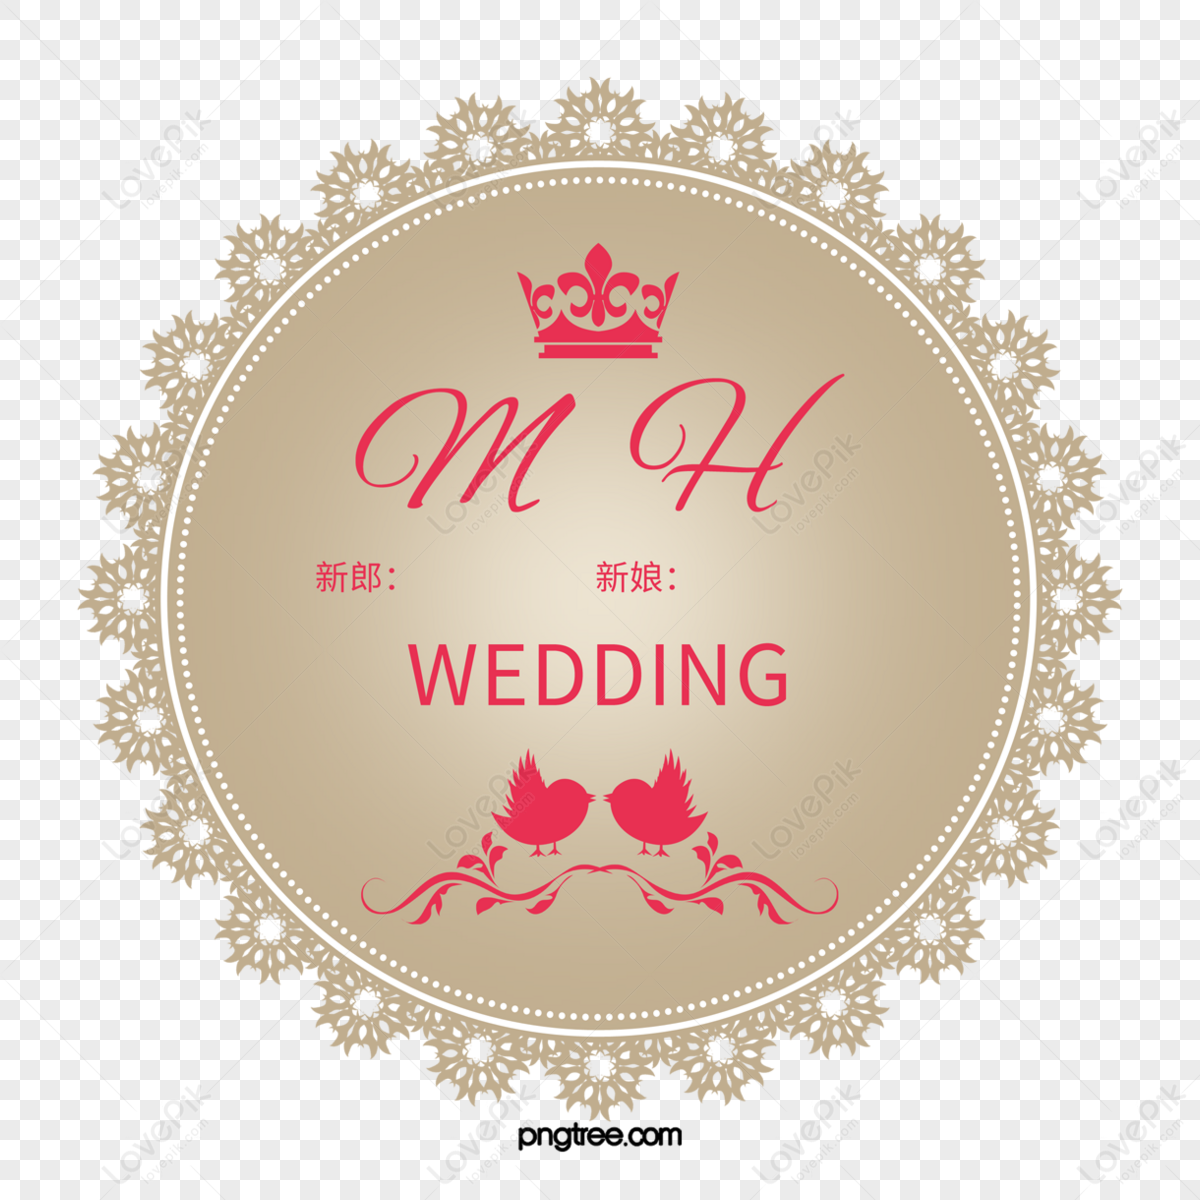 The Wedding Festival Company - Wedding Invitation Logo Png - Free Transparent  PNG Download - PNGkey